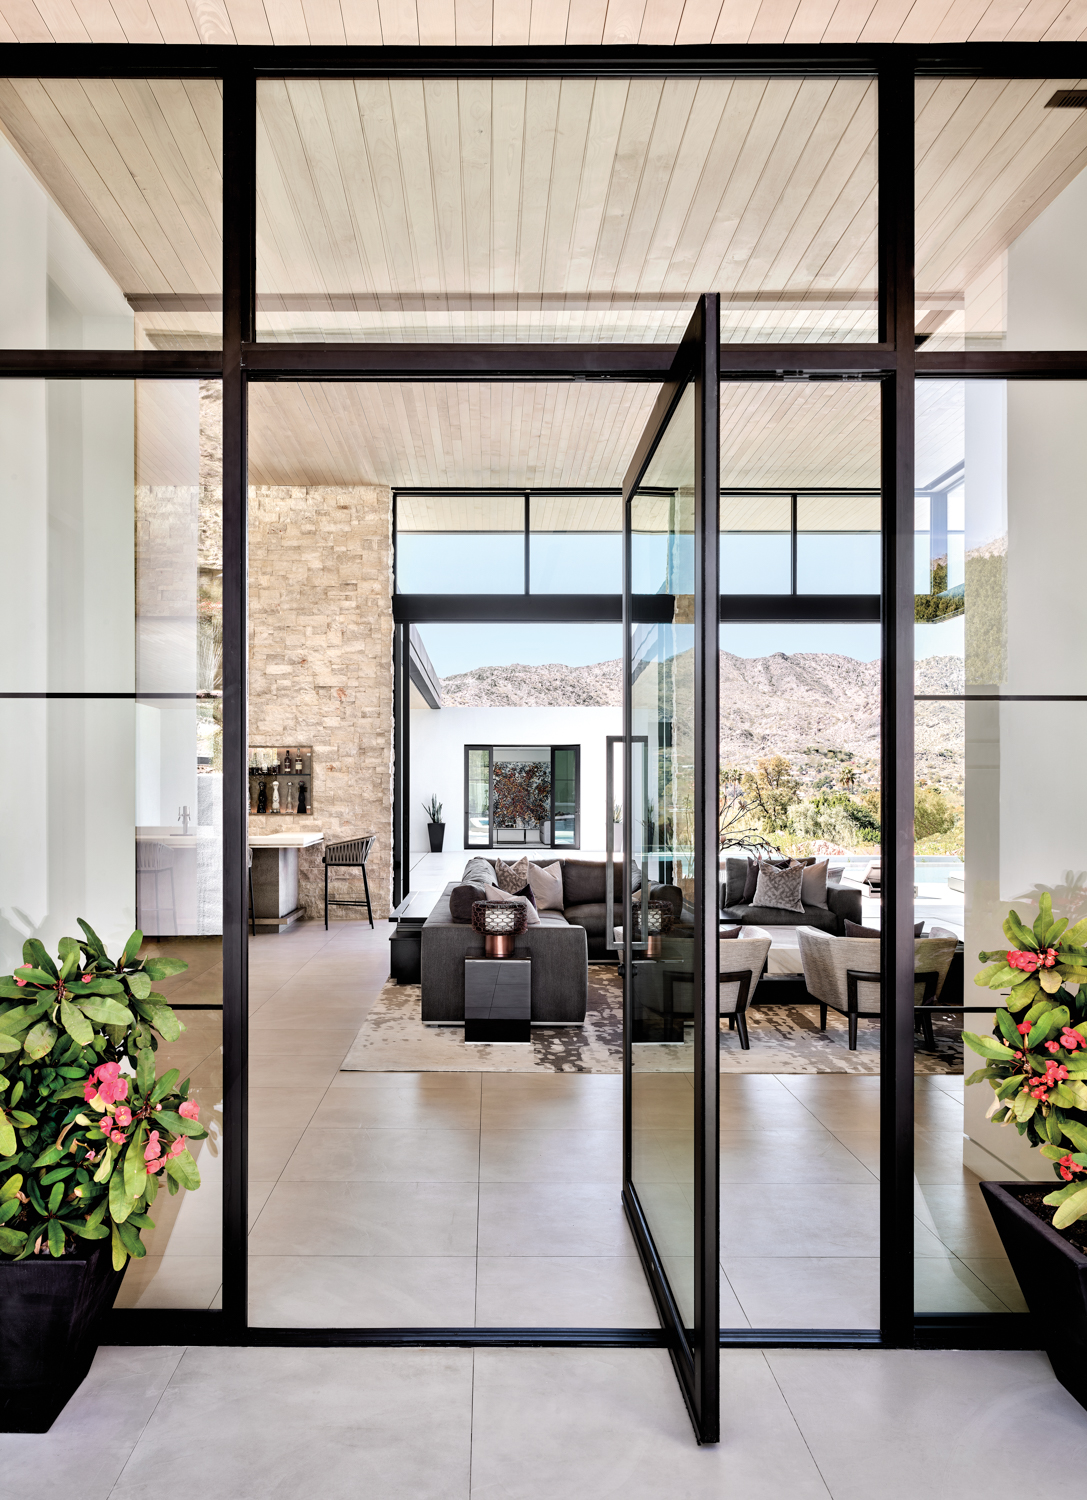 An entry way into the house with glass-and-steel doors. Past the living room you can see through the backyard with a mountain in the background.